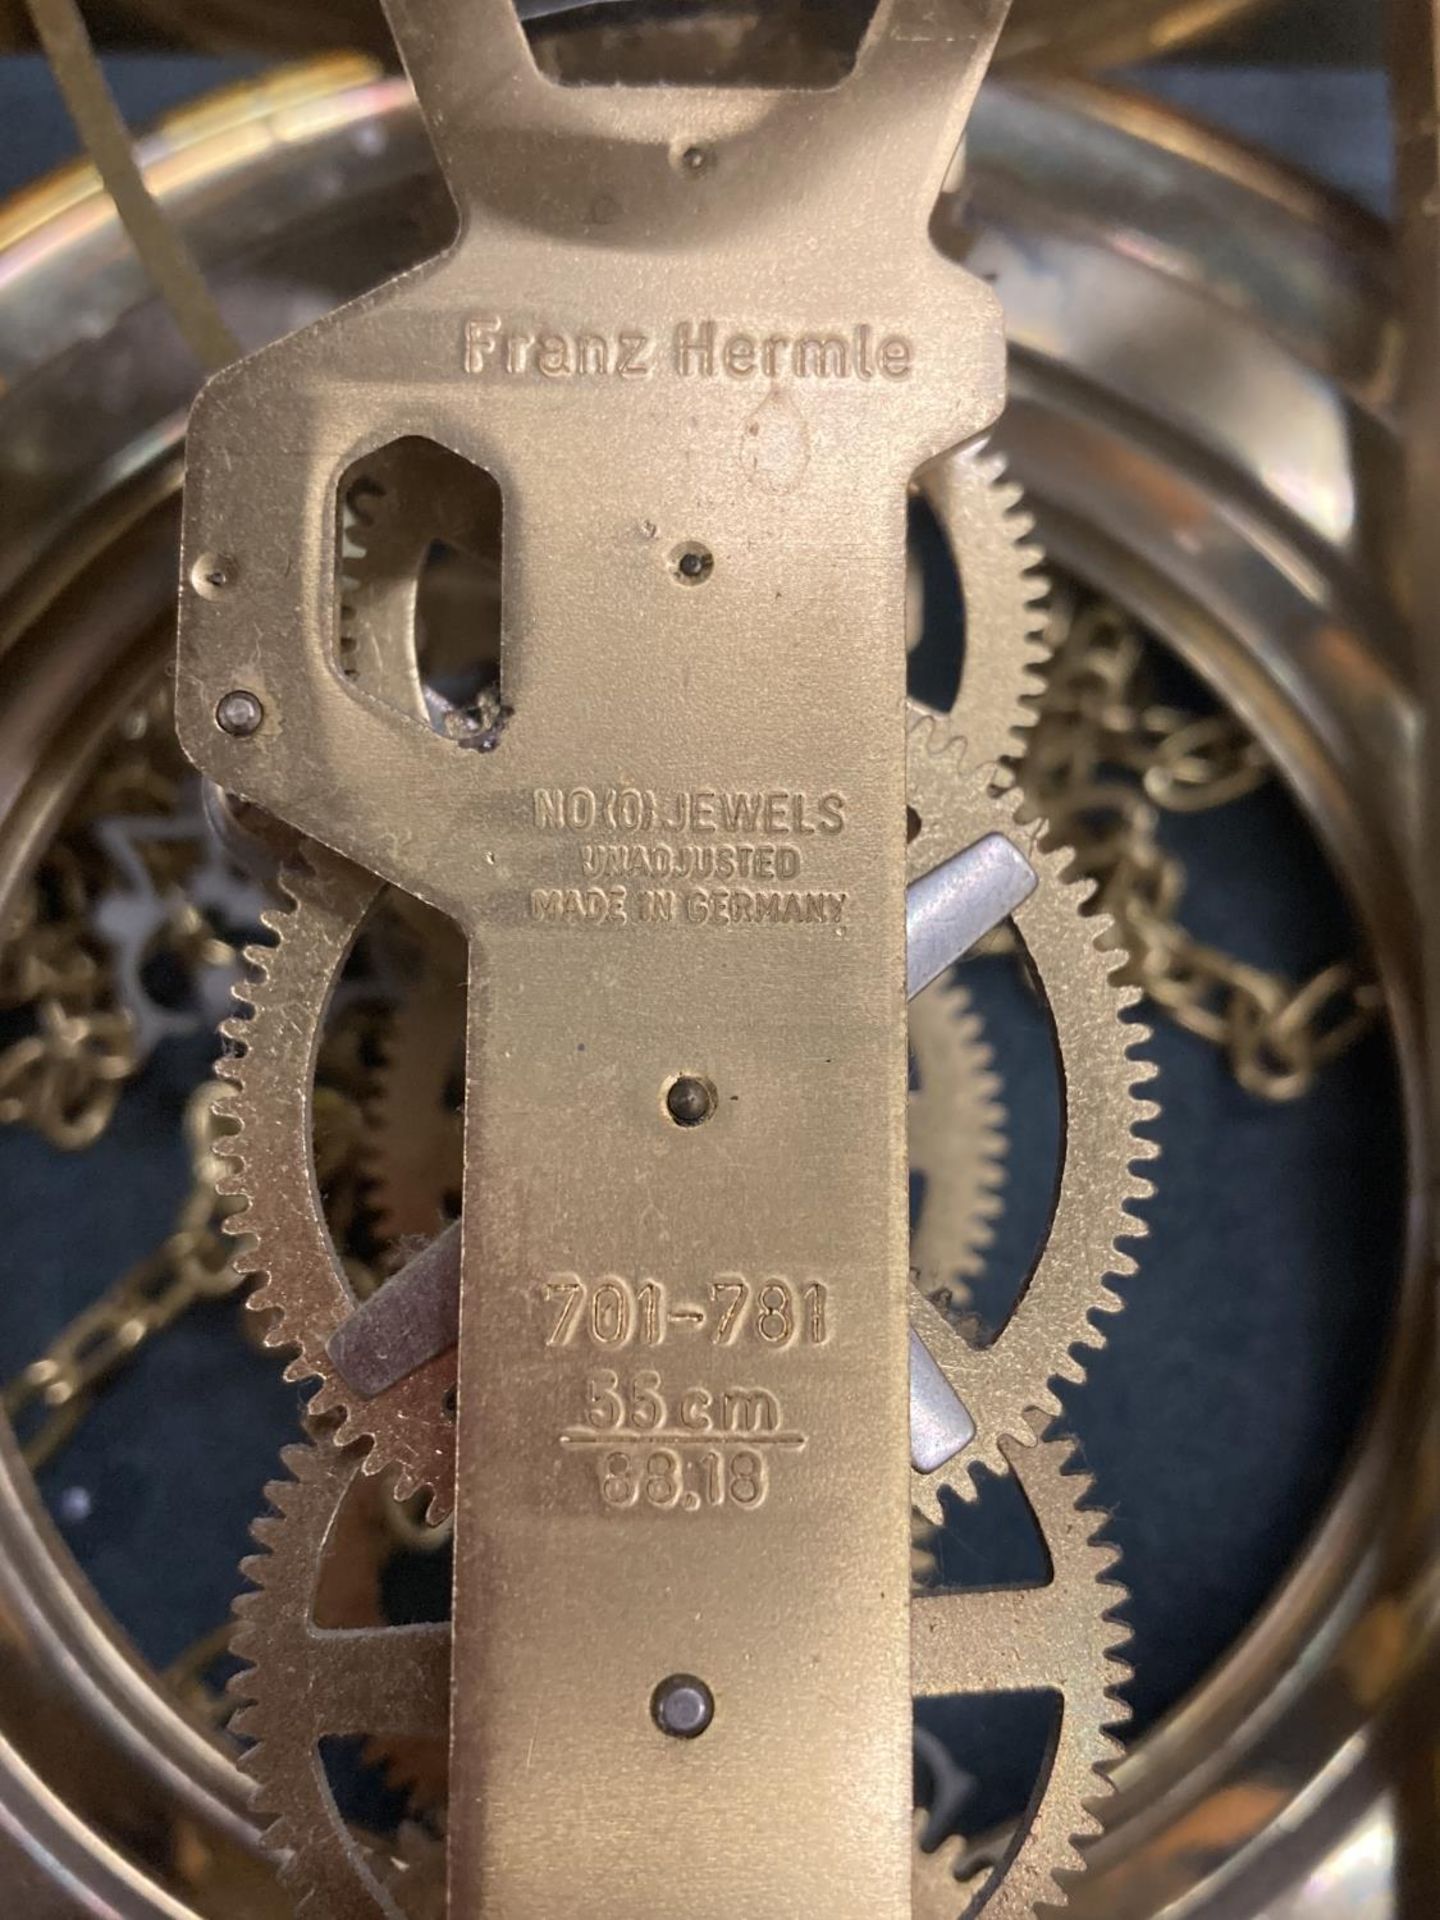 A FRANZ HERMIE GERMAN CLOCK - Image 4 of 4